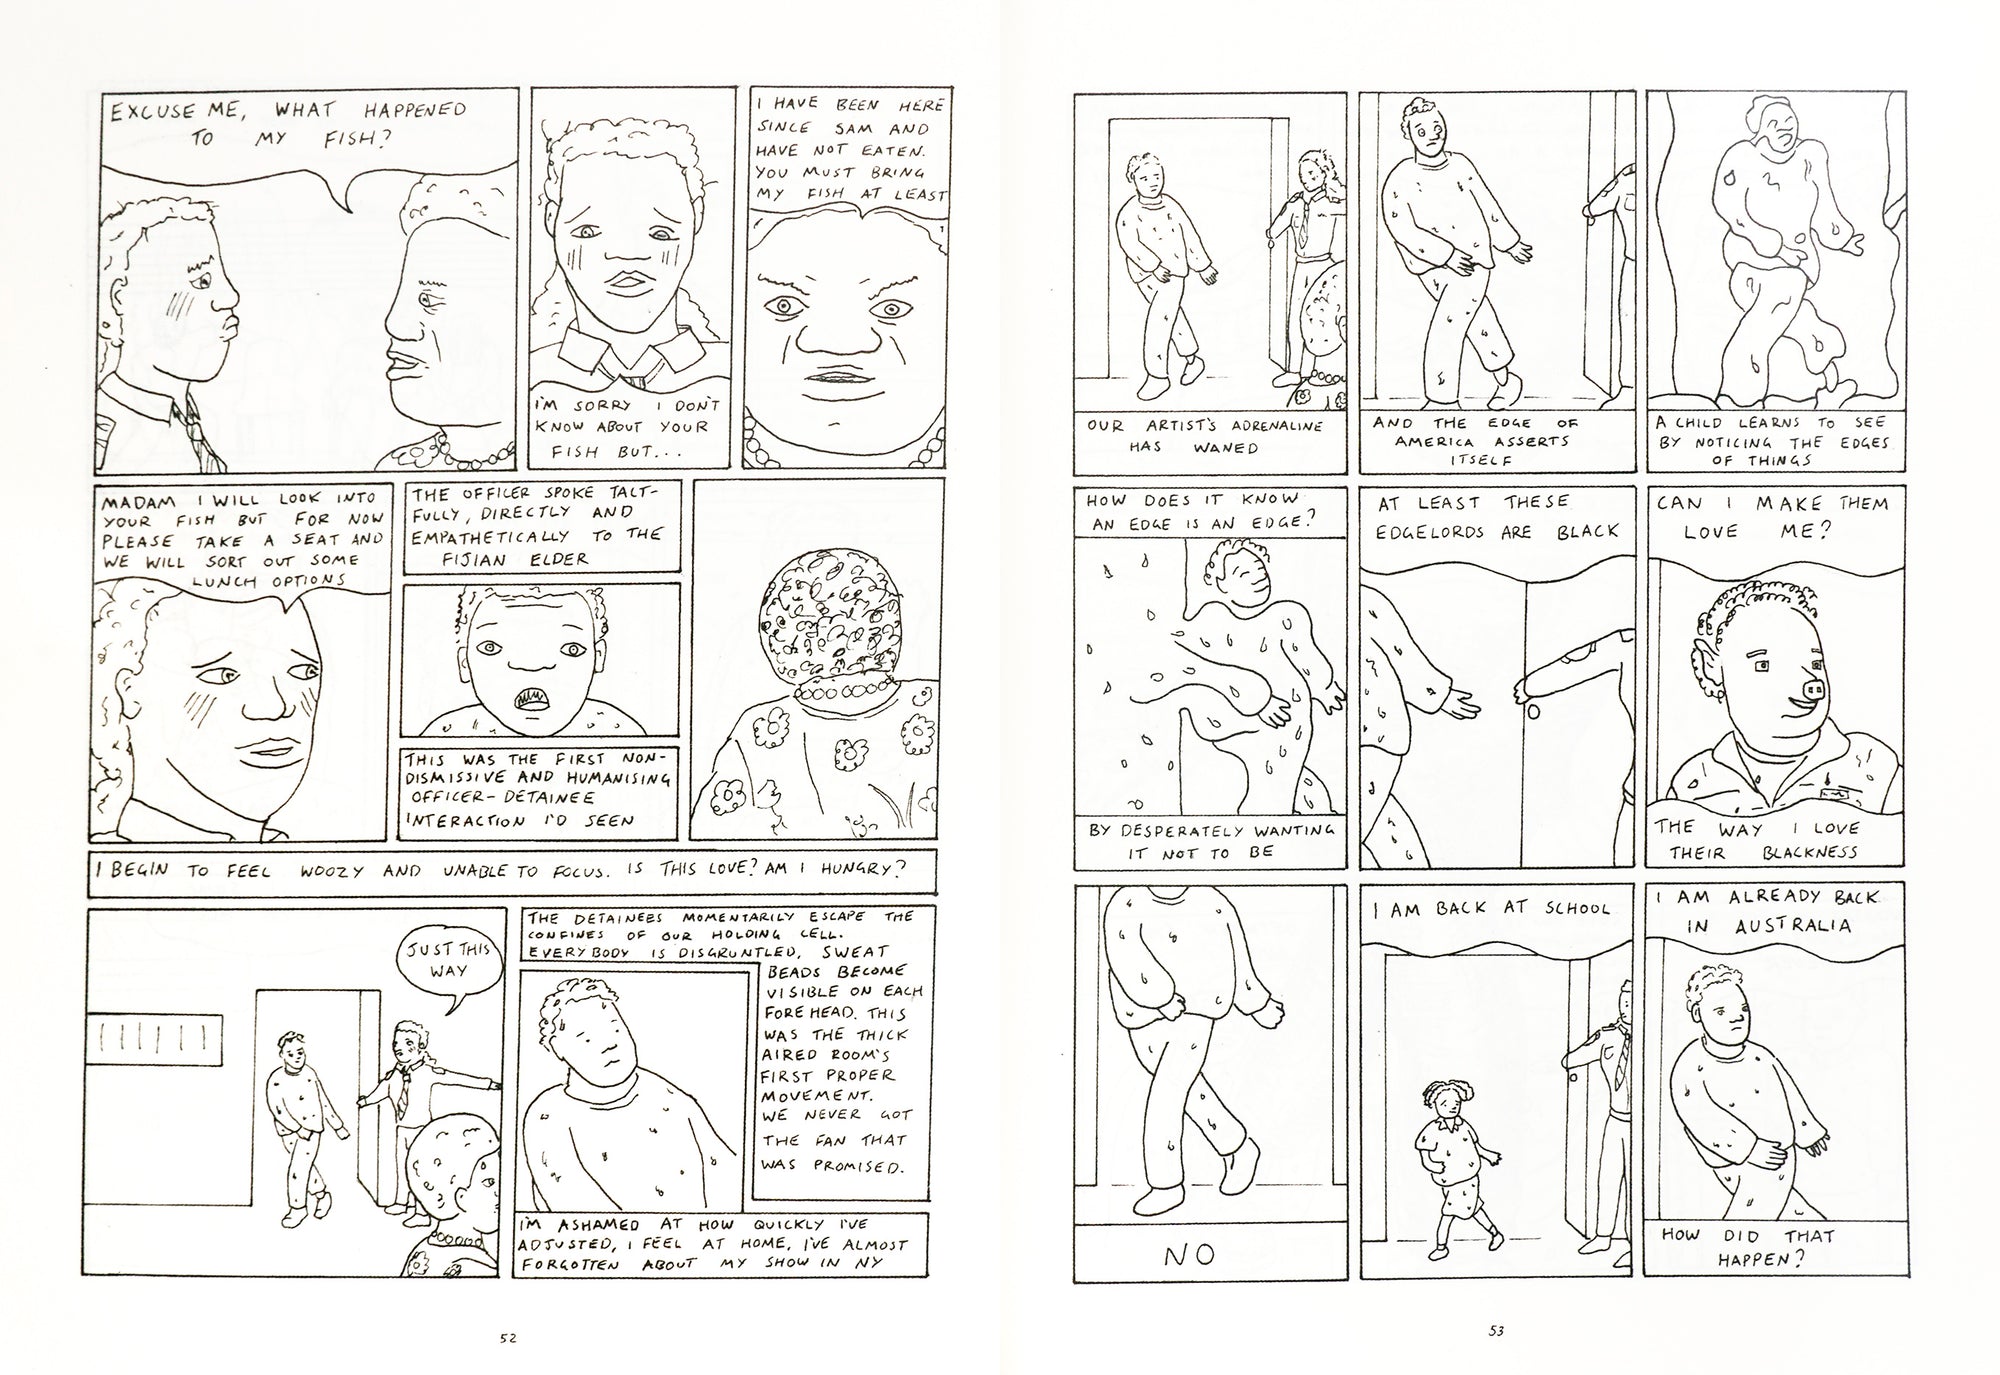 A spread showing the black on white comic strip on both pages. The drawings mainly use outlines, which aren't coloured in.